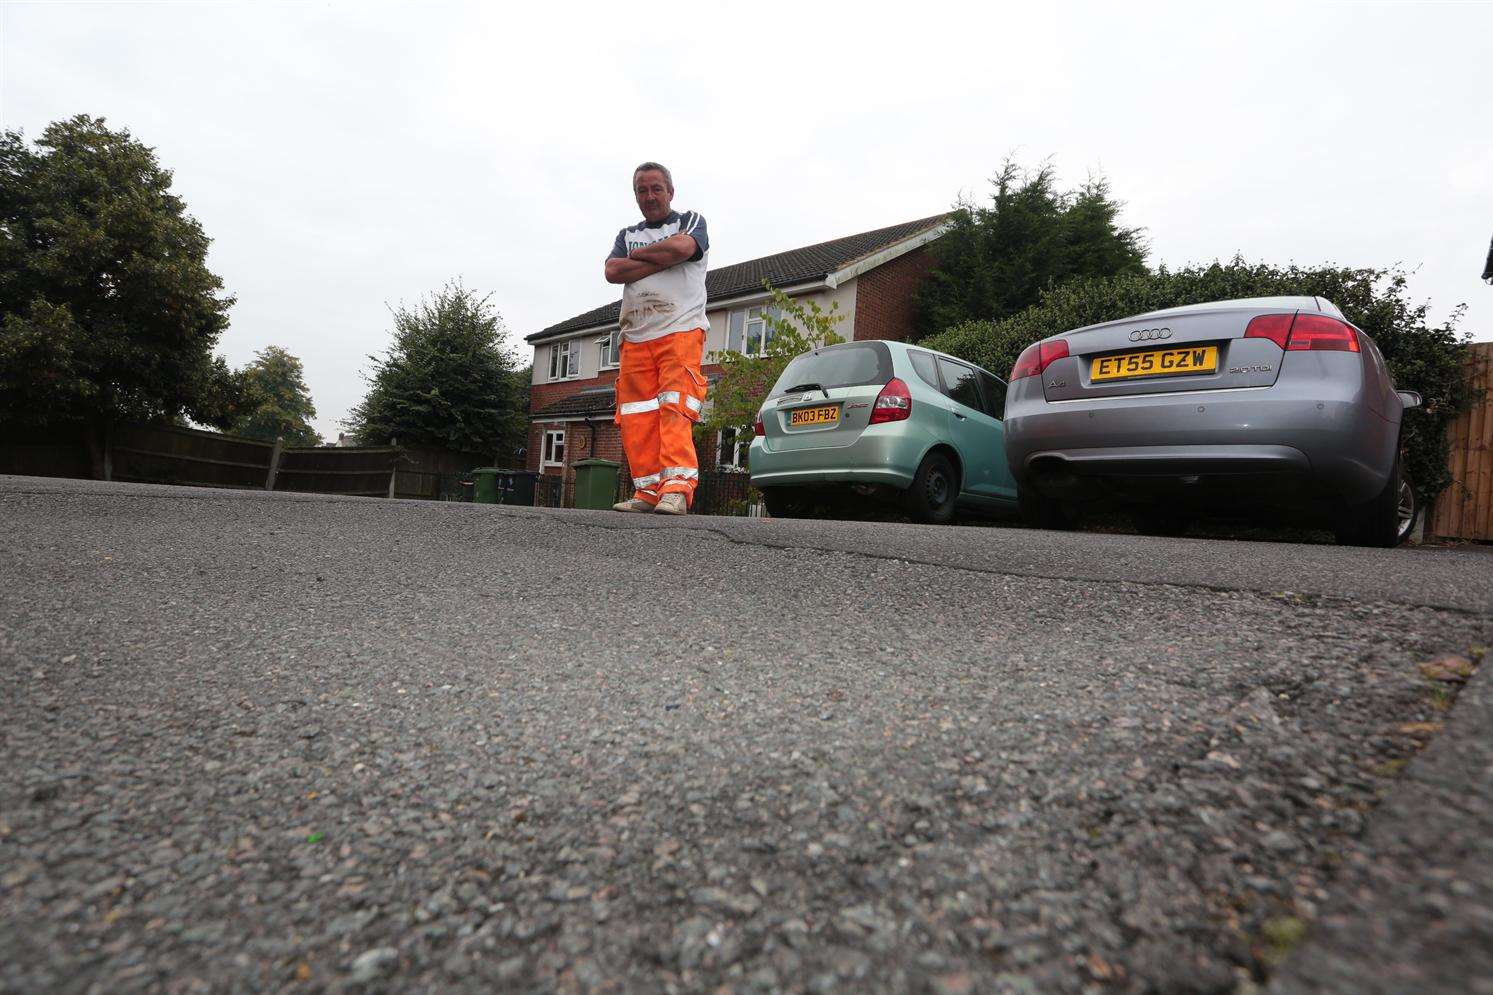 Lee Thwaites of Springwood Road, Barming, says the residents' car park outside his house is sinking every day